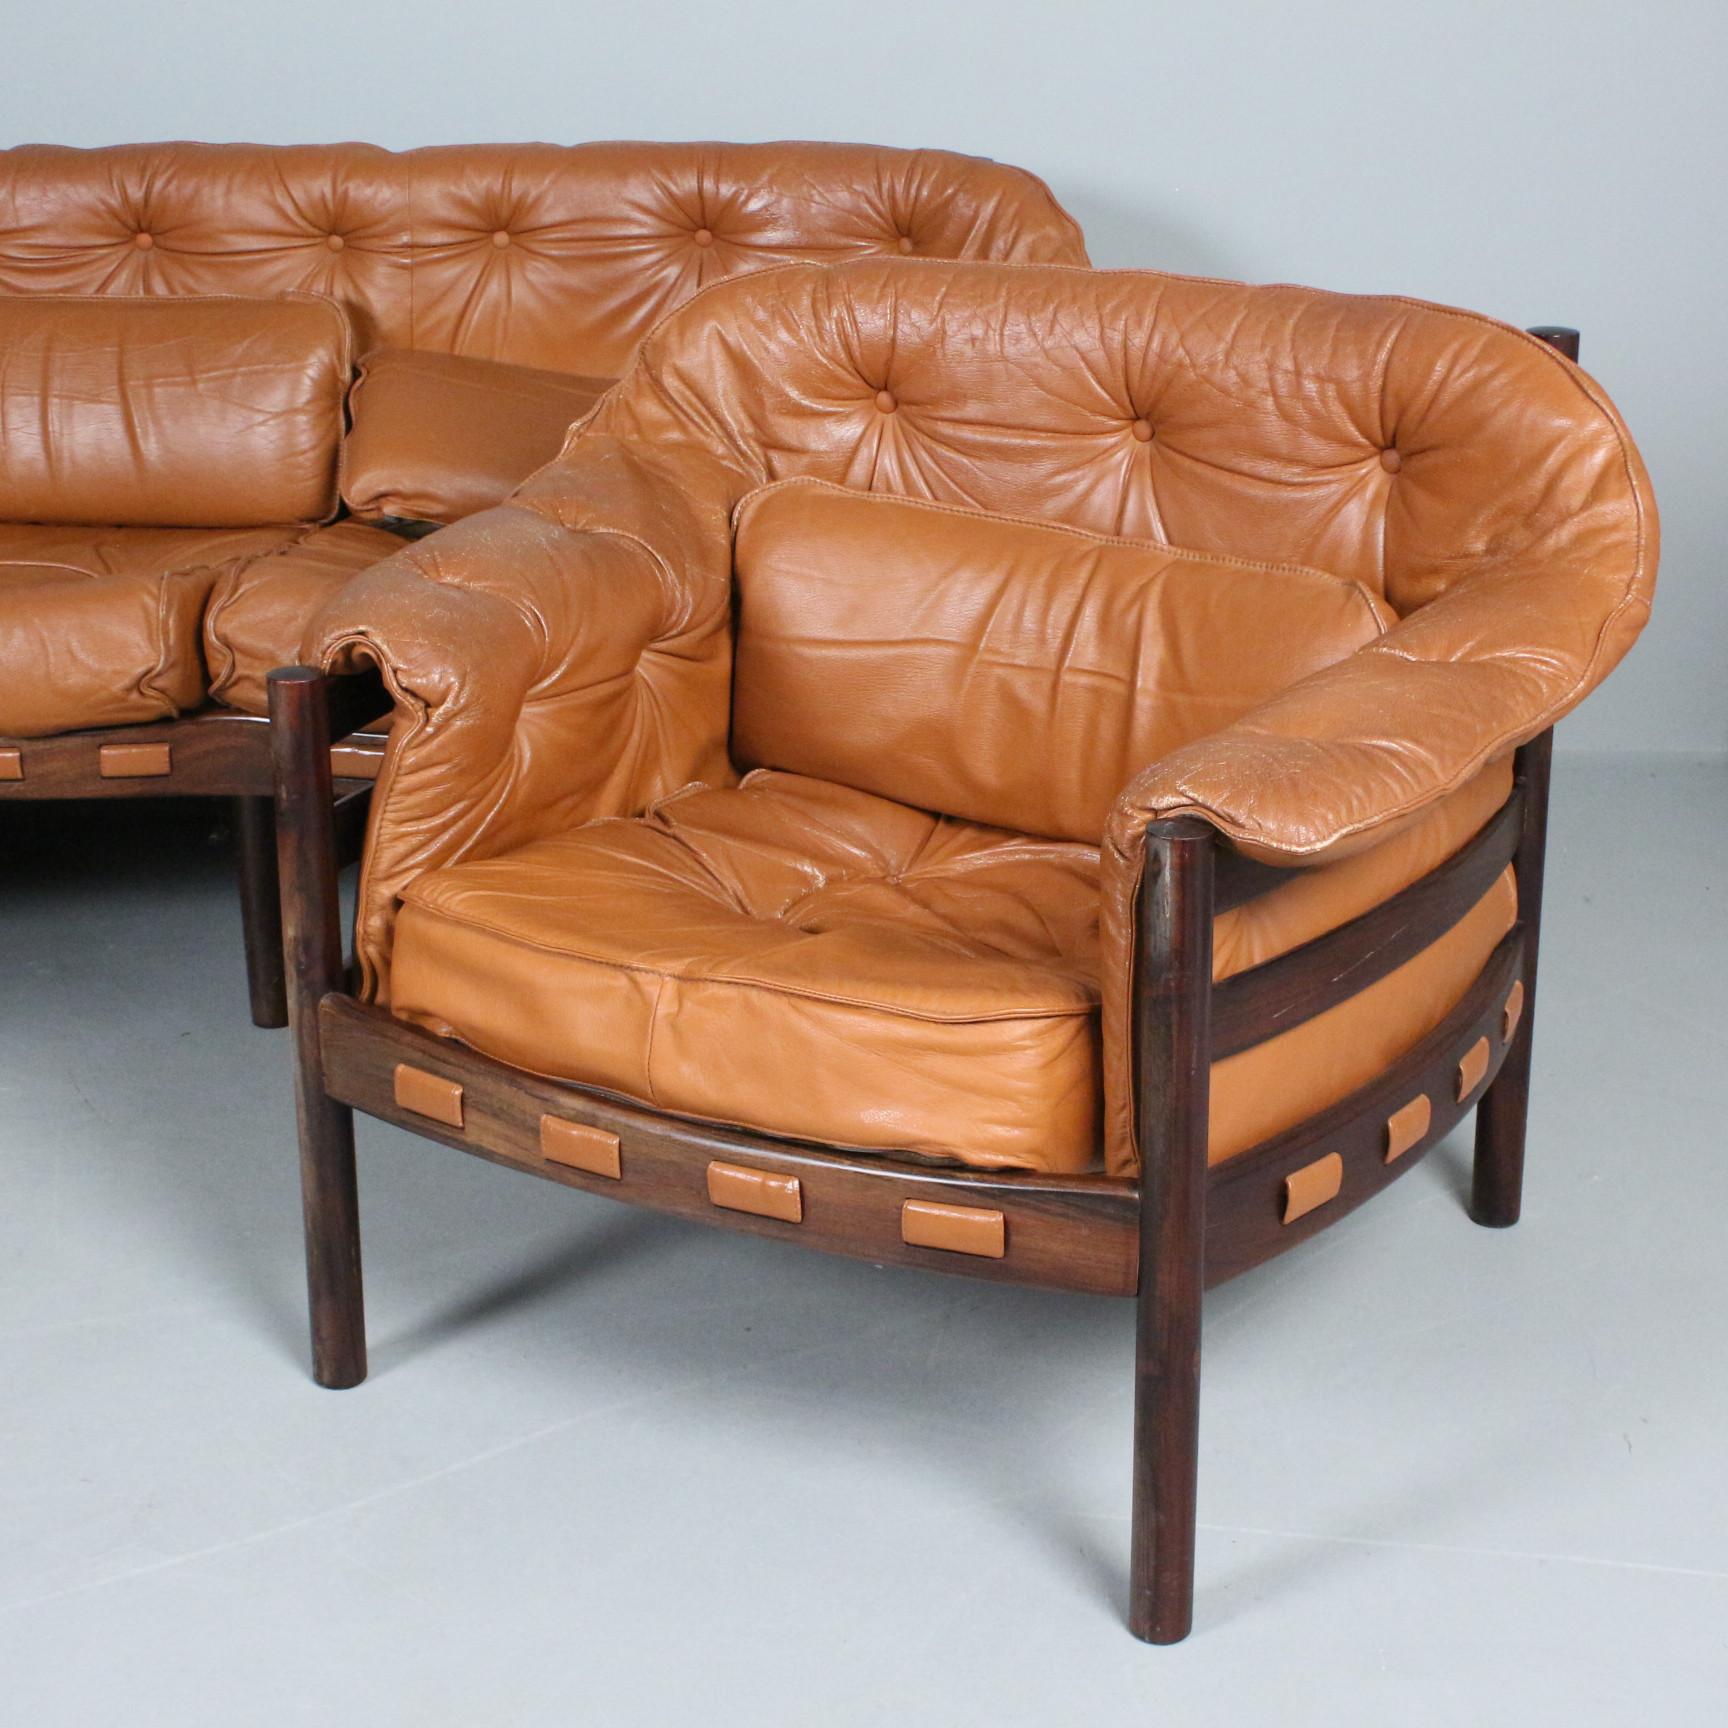 Arne Norell armchair for Coja made of dark  wood and brown leather made in Sweden Sweden around 1960
Good condition
2 armchairs available Price for 1 armchair 
Also a matching Sofa is available on the site